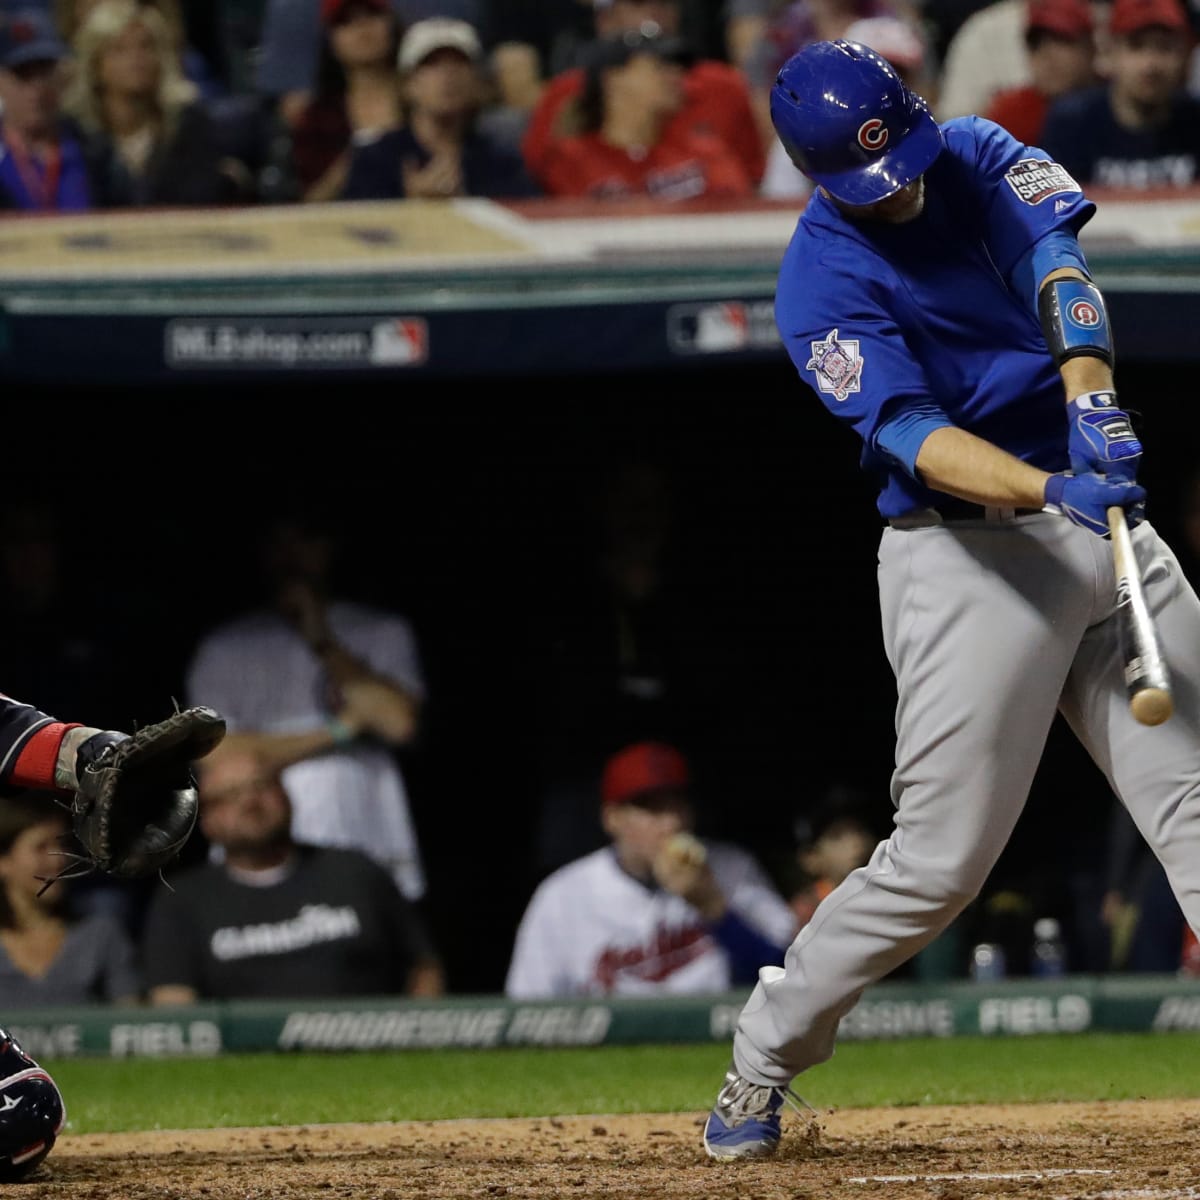 David Ross Last Hits form the 2013 World Series. And Game 5 Post